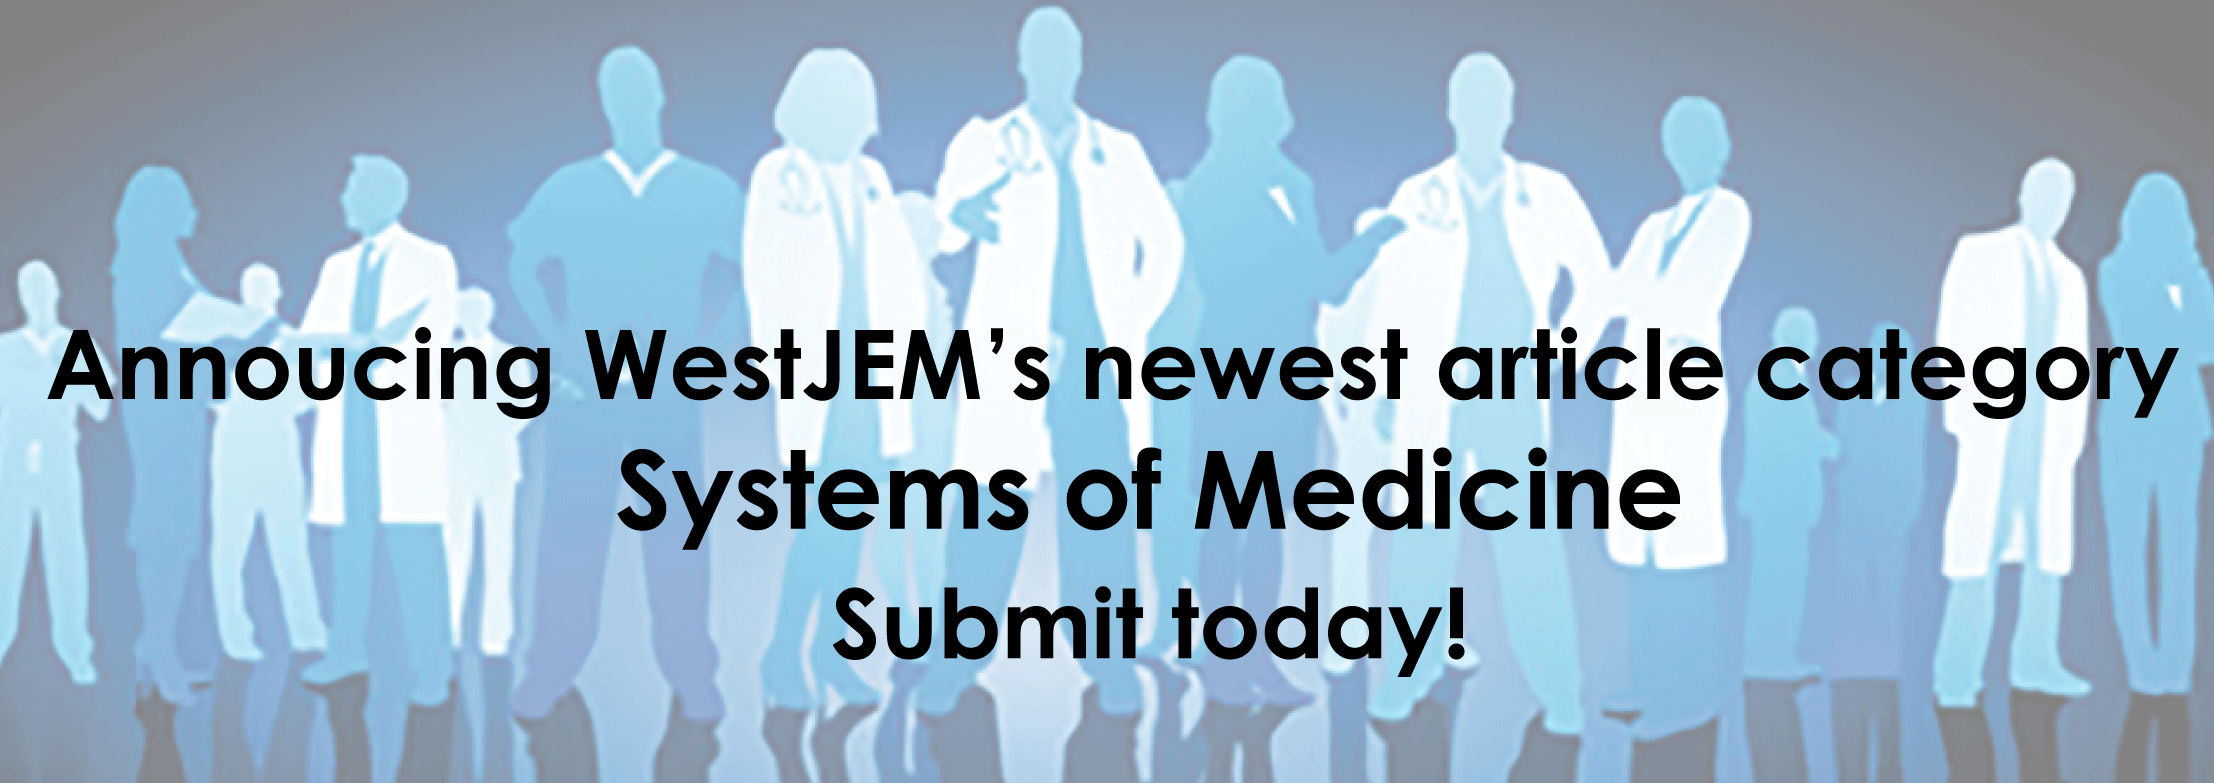 systems-of-medicine-rotating-banner